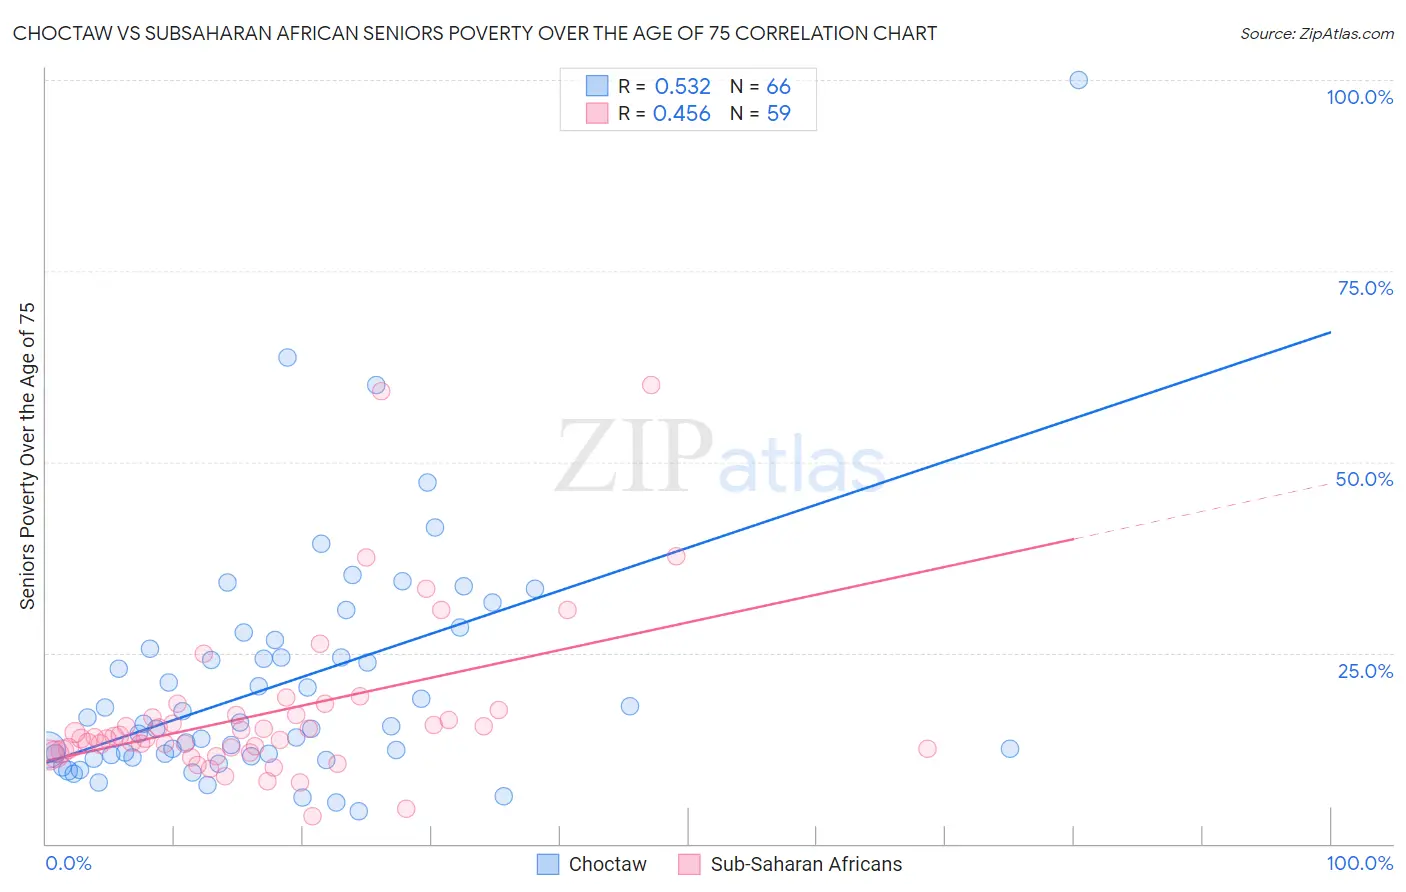 Choctaw vs Subsaharan African Seniors Poverty Over the Age of 75